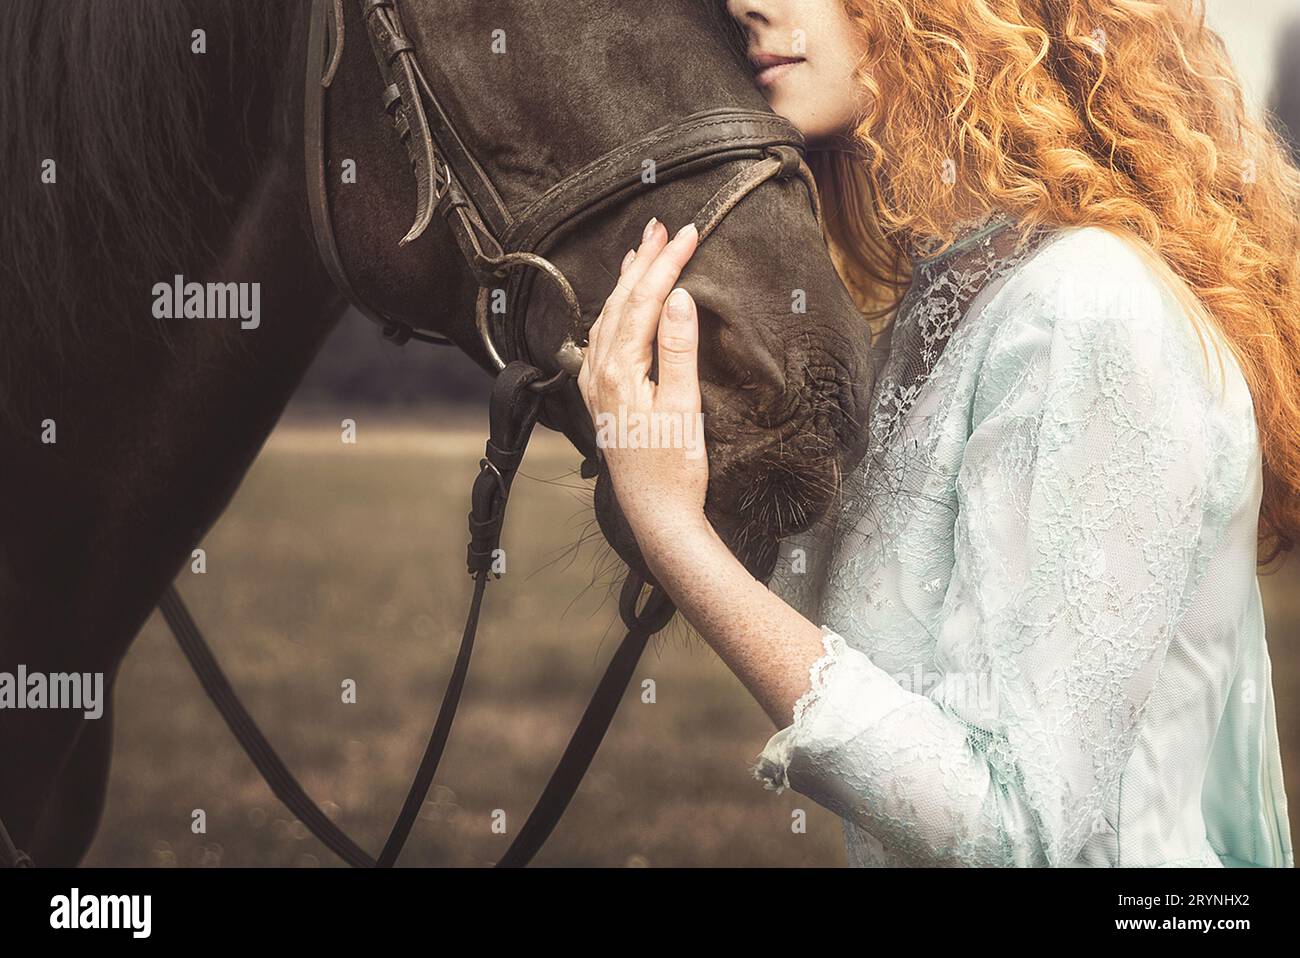 Artistic photo. young Woman with no face dressed in an elegant vintage dress, gently cuddling a horse, stroking his head. love f Stock Photo